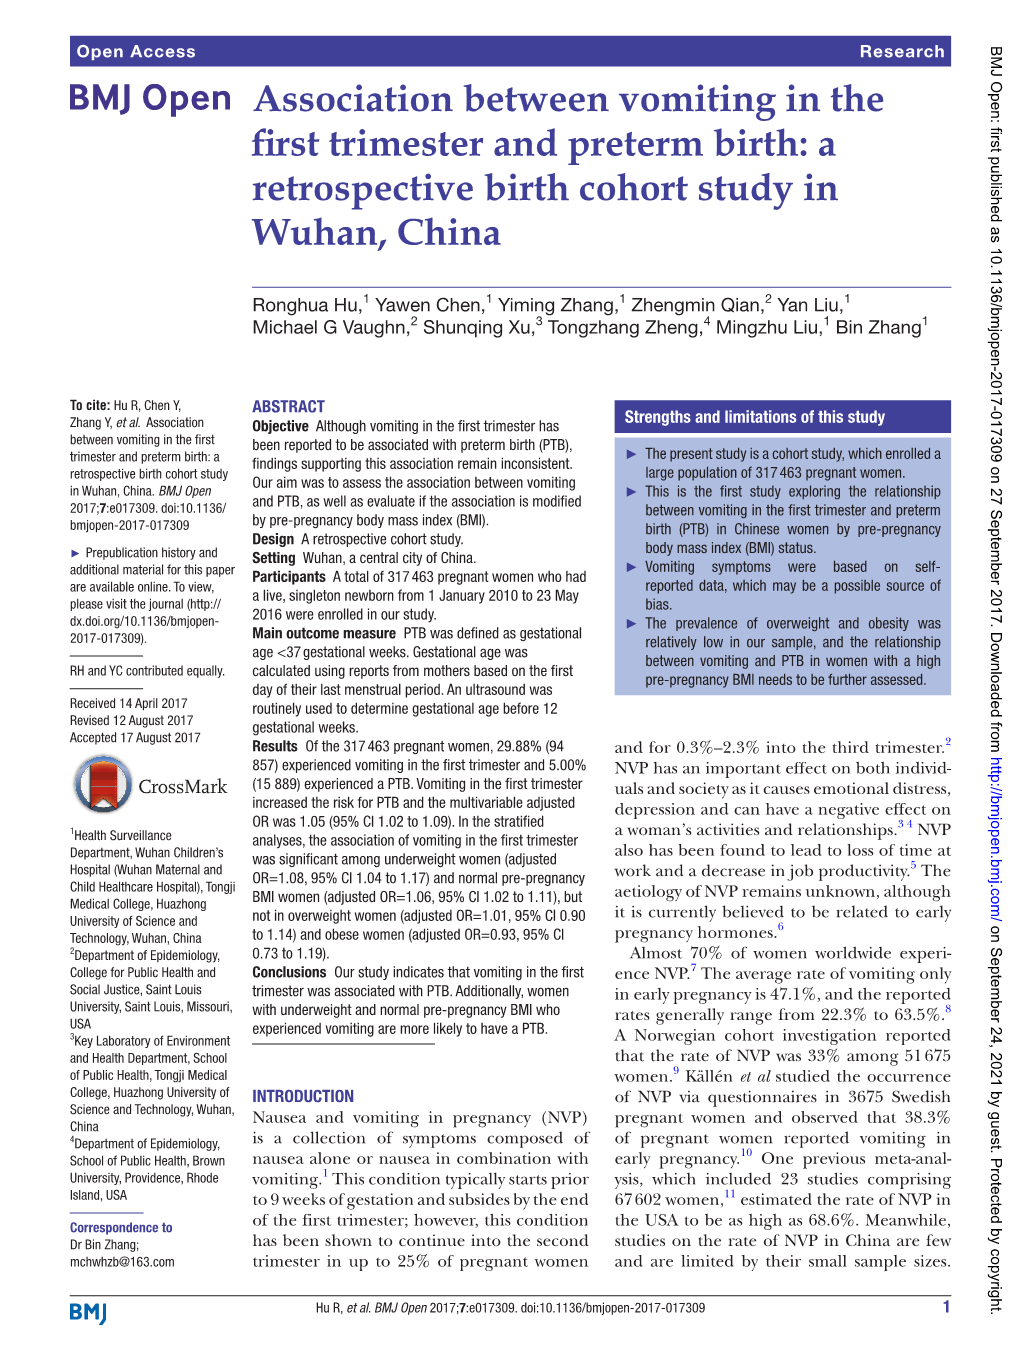 Association Between Vomiting in the First Trimester and Preterm Birth: a Retrospective Birth Cohort Study in Wuhan, China